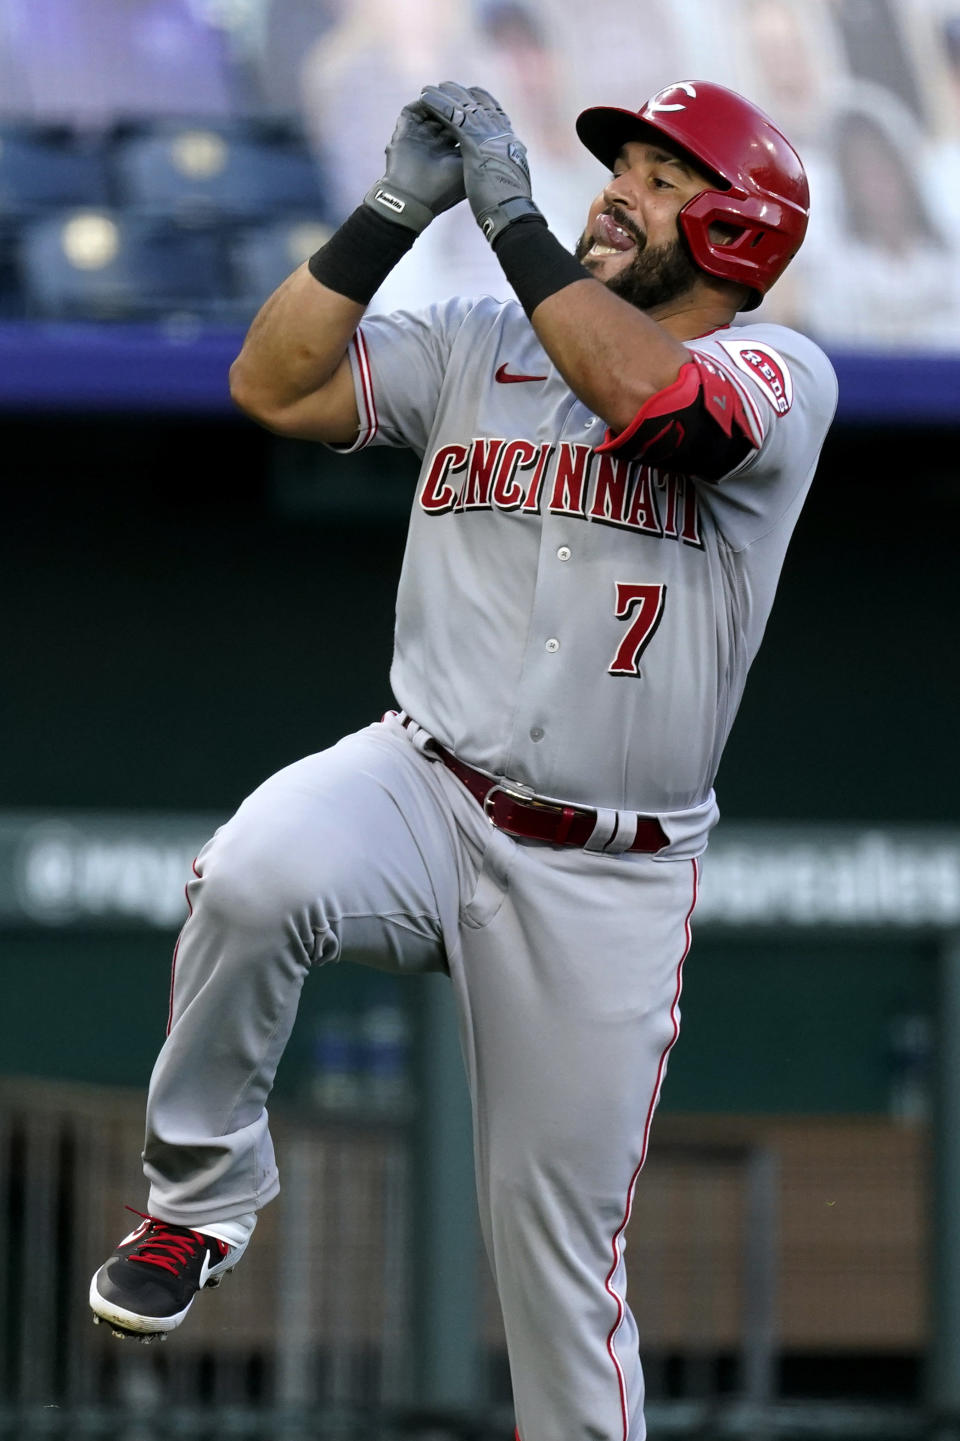 Cincinnati Reds' Eugenio Suarez celebrates after hitting a solo home run during the third inning of Game 2 of a baseball doubleheader against the Kansas City Royals on Wednesday, Aug. 19, 2020, in Kansas City, Mo. (AP Photo/Charlie Riedel)